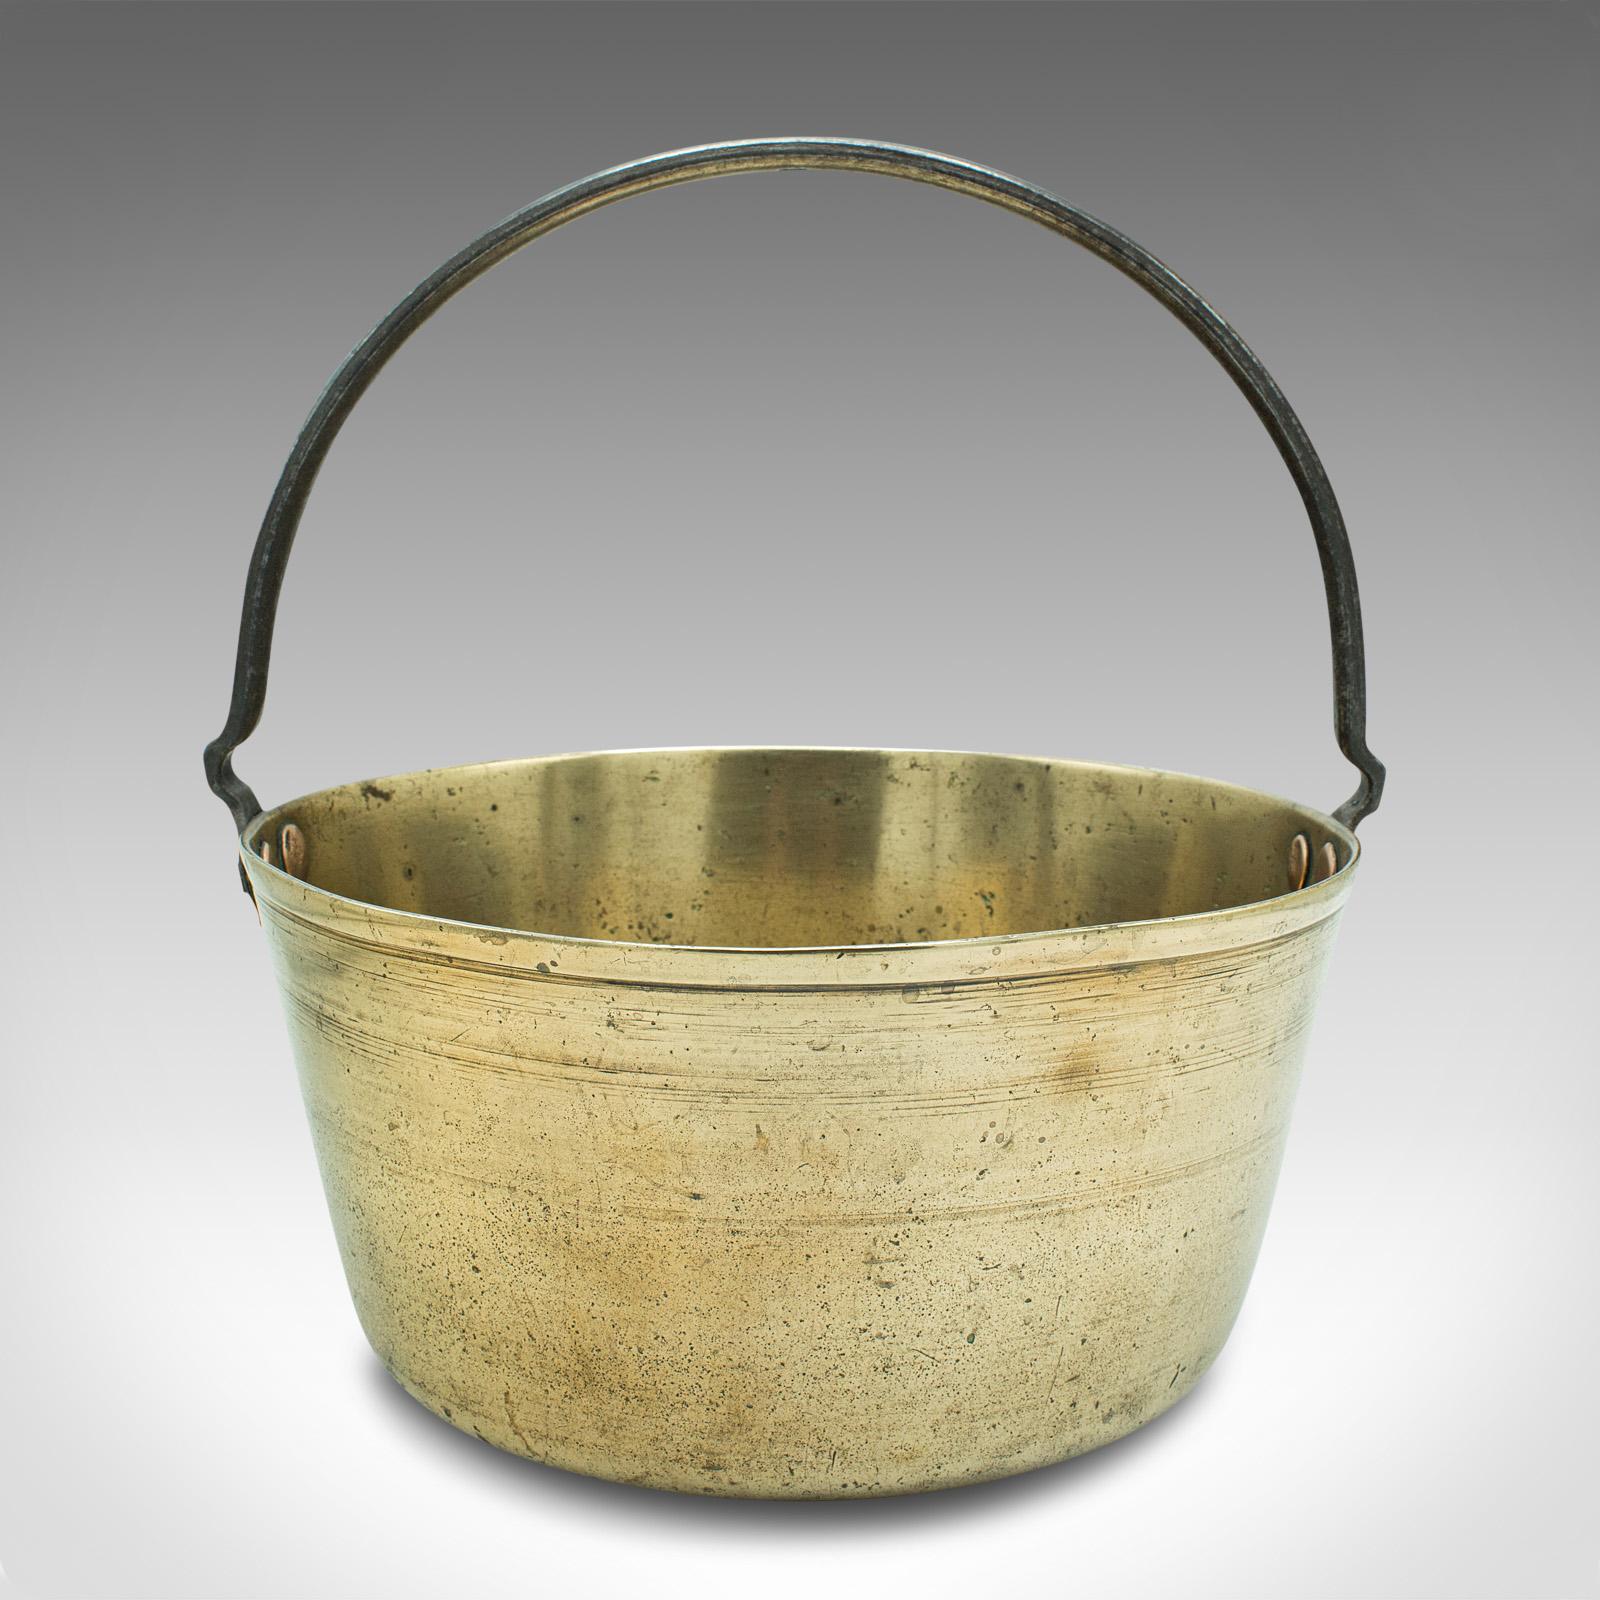 This is an antique decorative jam pan. An English, brass planter or jardiniere, dating to the Georgian period, circa 1800.

Delightfully polished pan with a lightly weathered appearance
Displays a desirable aged patina and in good original